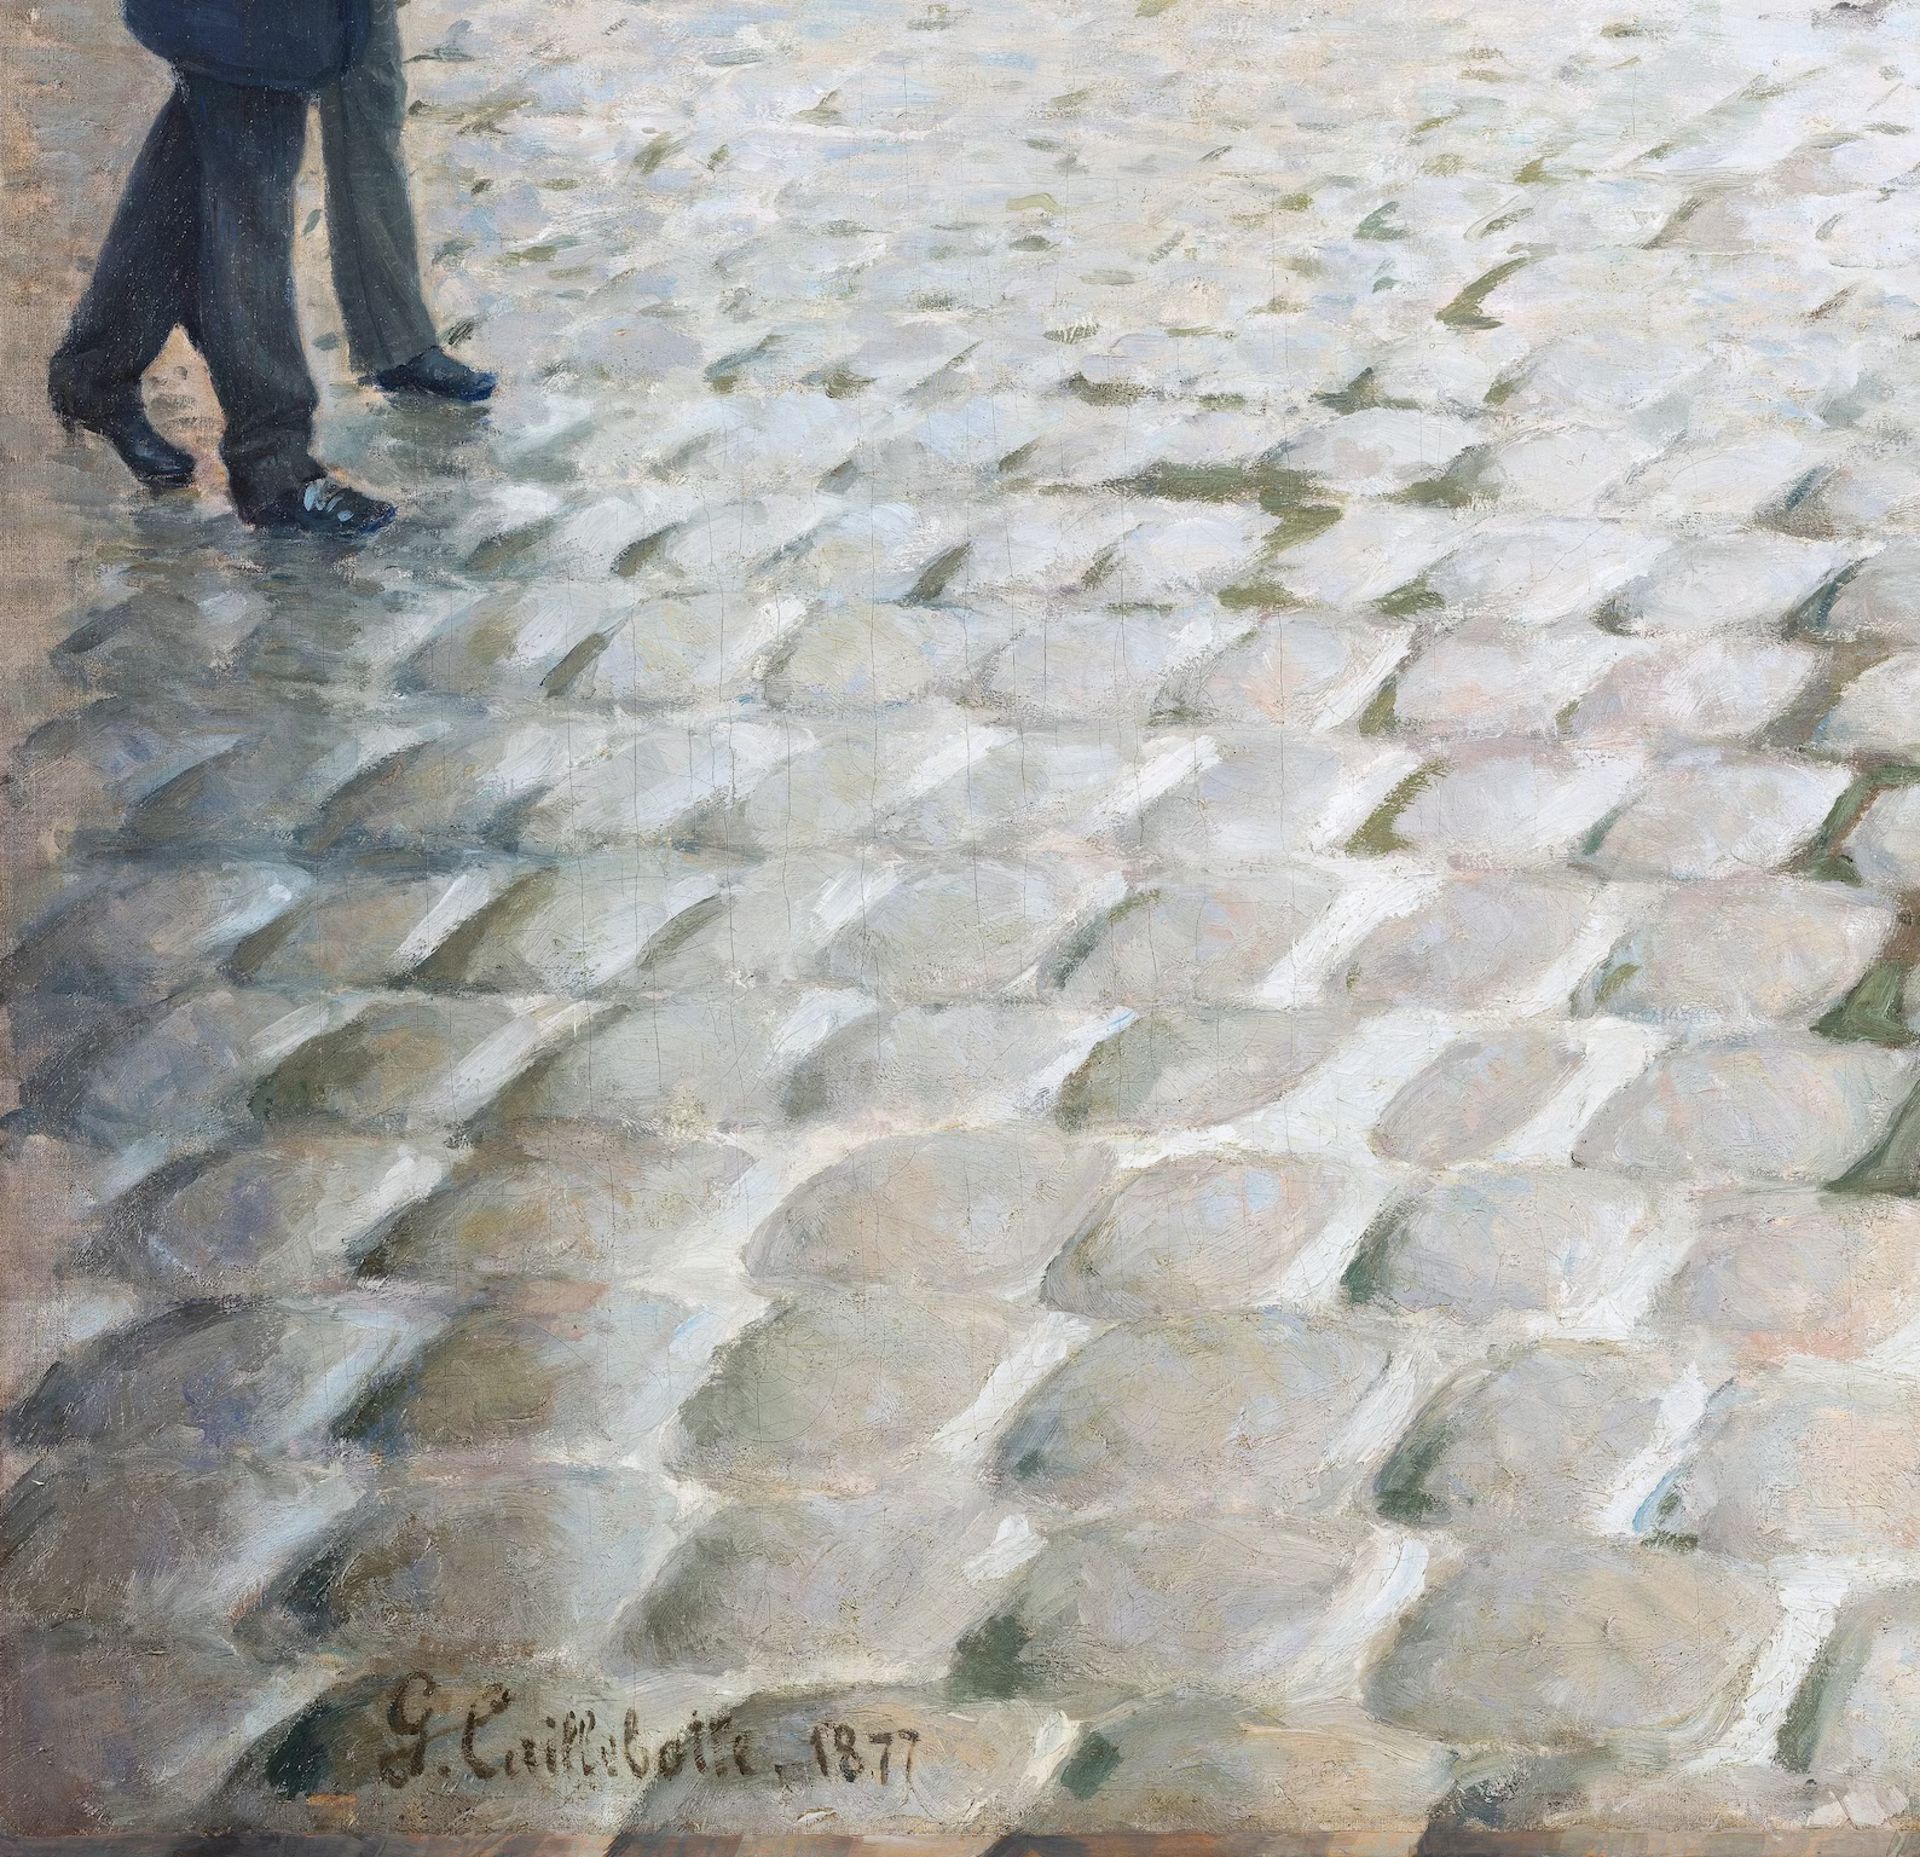 Gustave Caillebotte "Paris" Offset Lithograph - Image 3 of 3